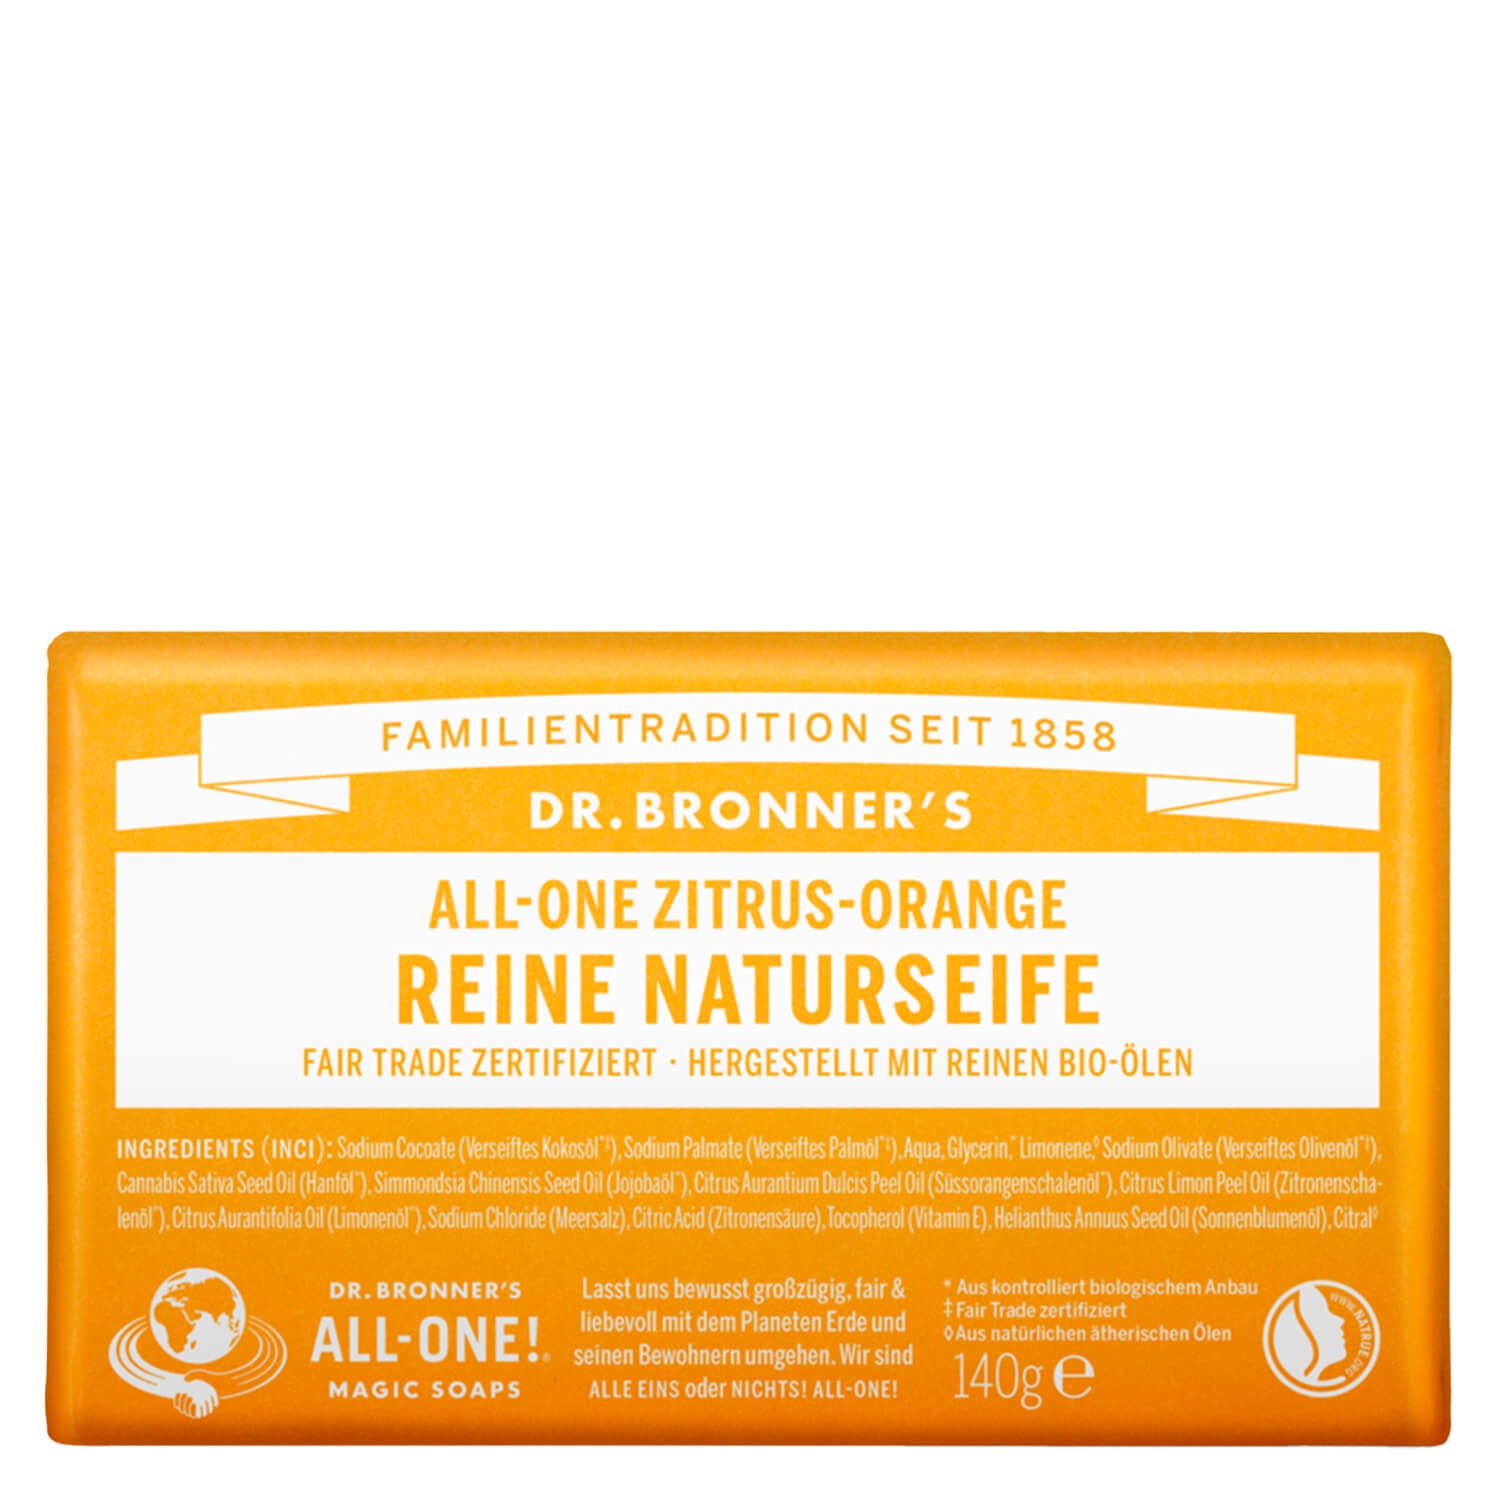 Product image from DR. BRONNER'S - Naturseife Citrus Orange